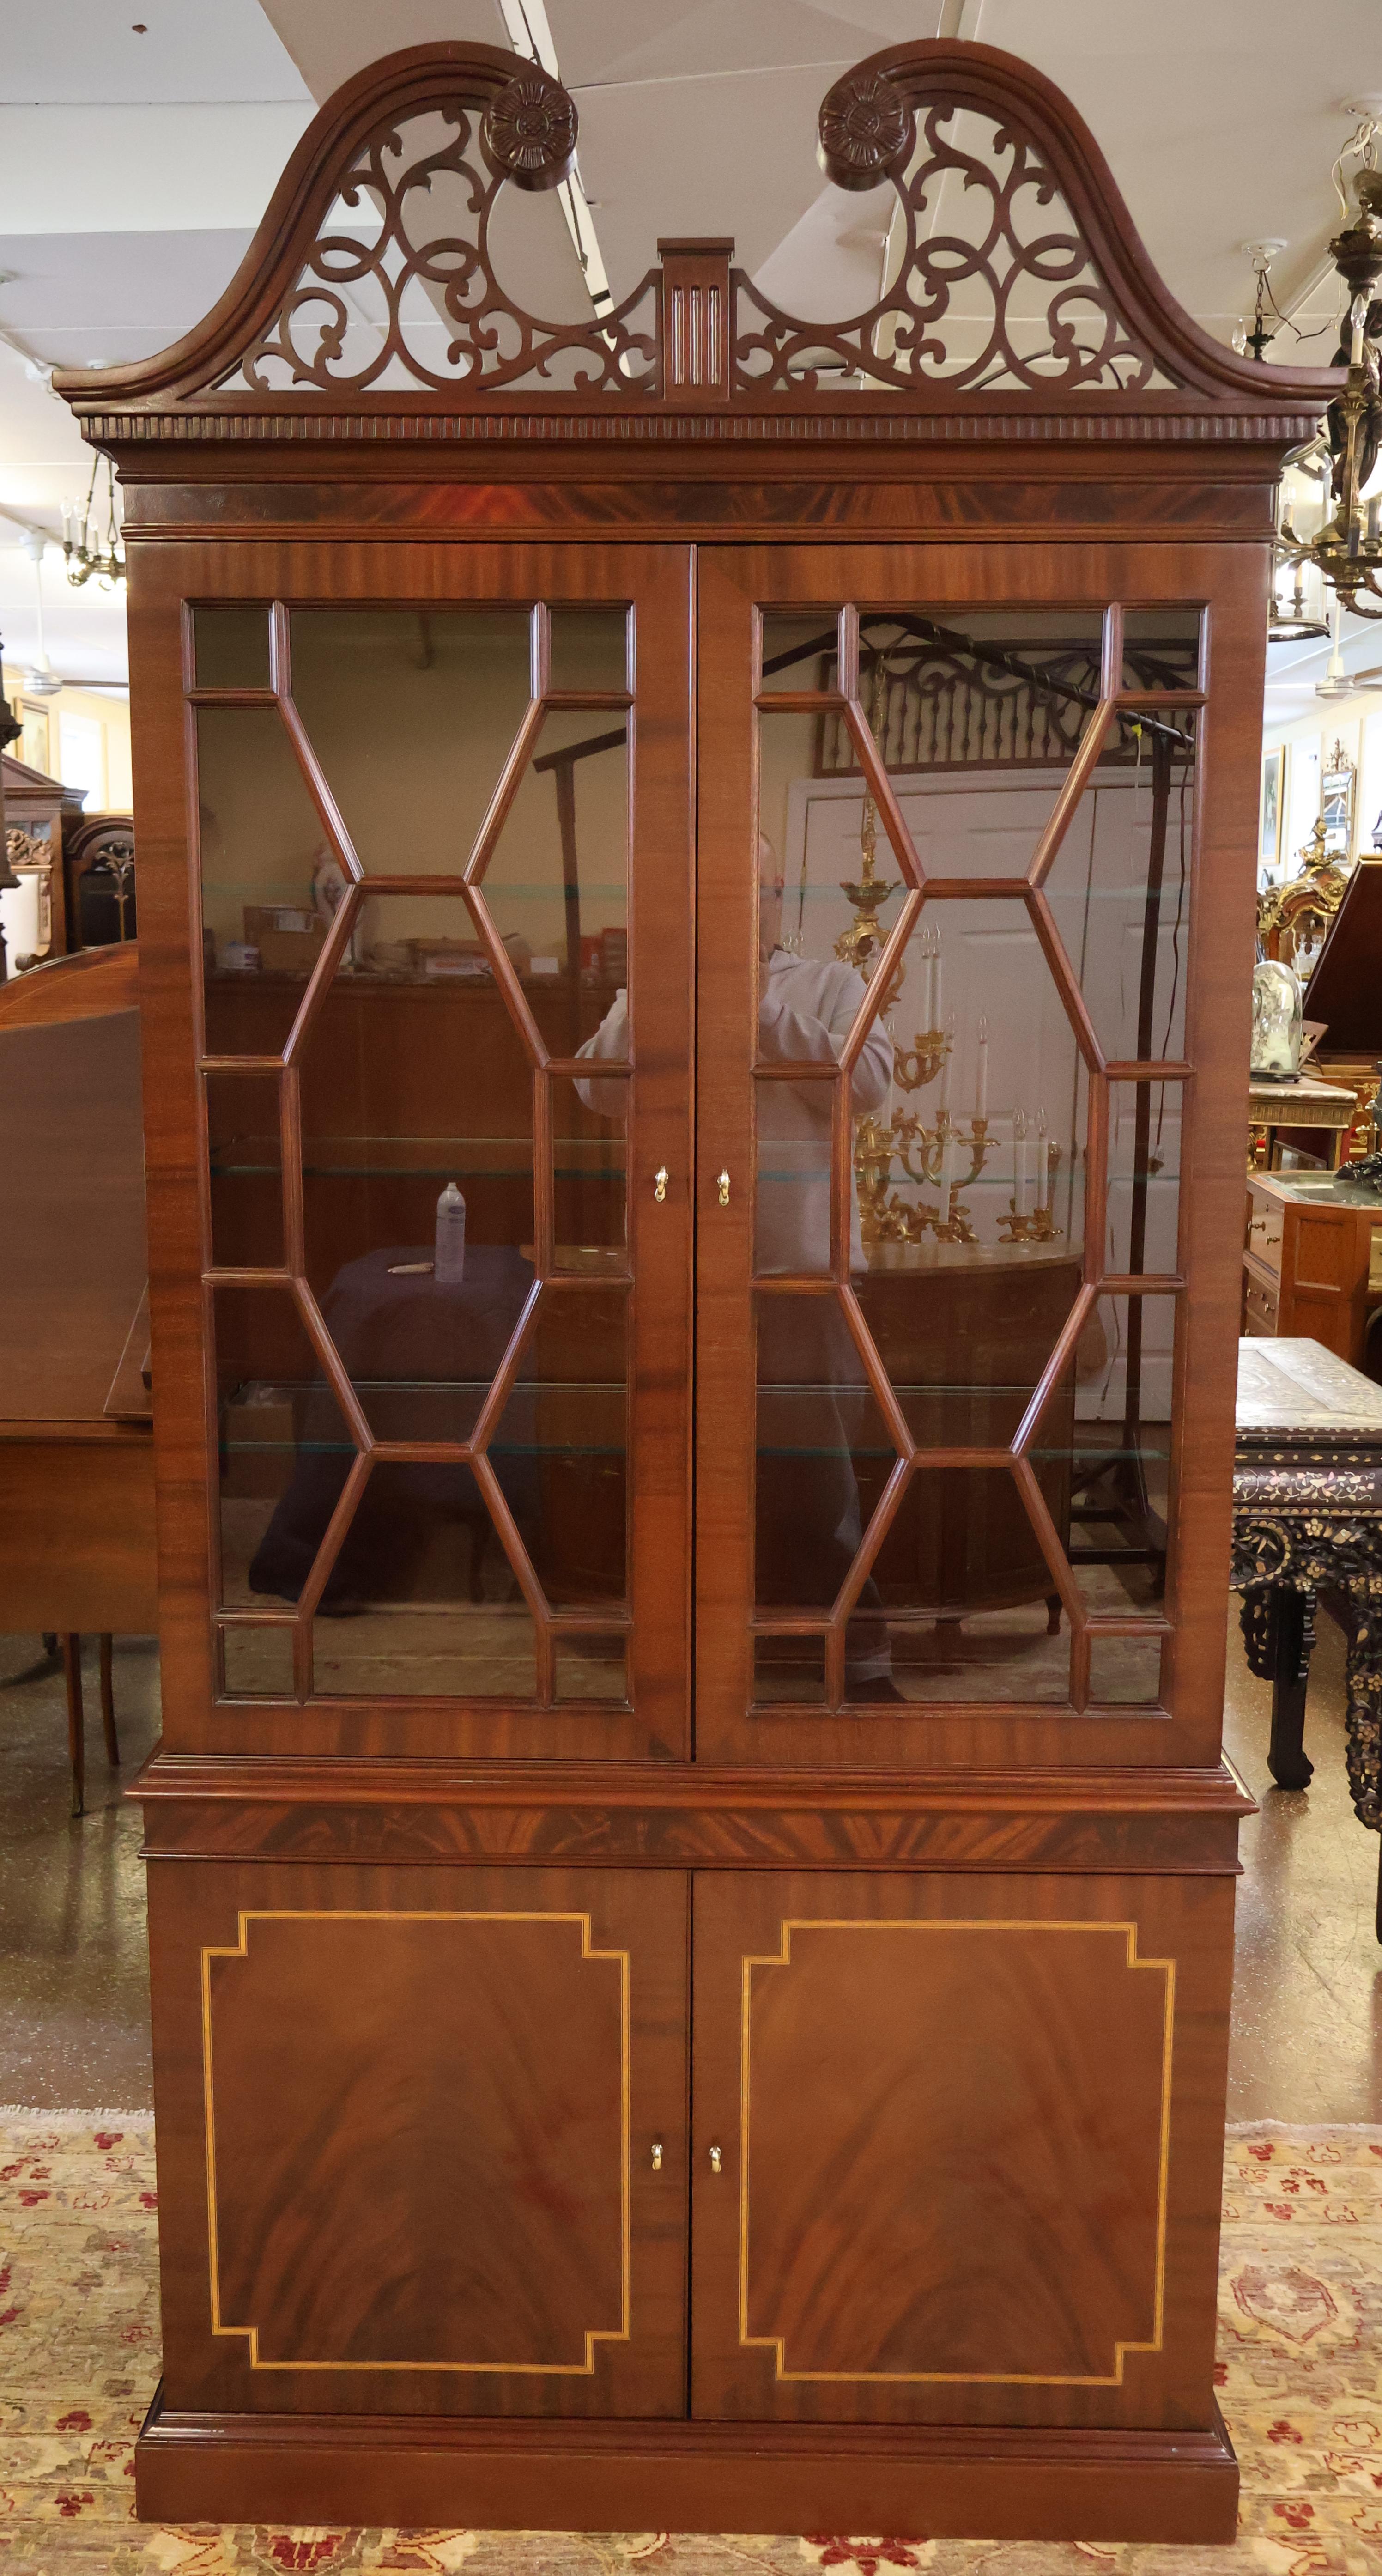 Councill Craftsman Regency Style Flame Mahogany Curio China Display Cabinet

Dimensions : 92,5